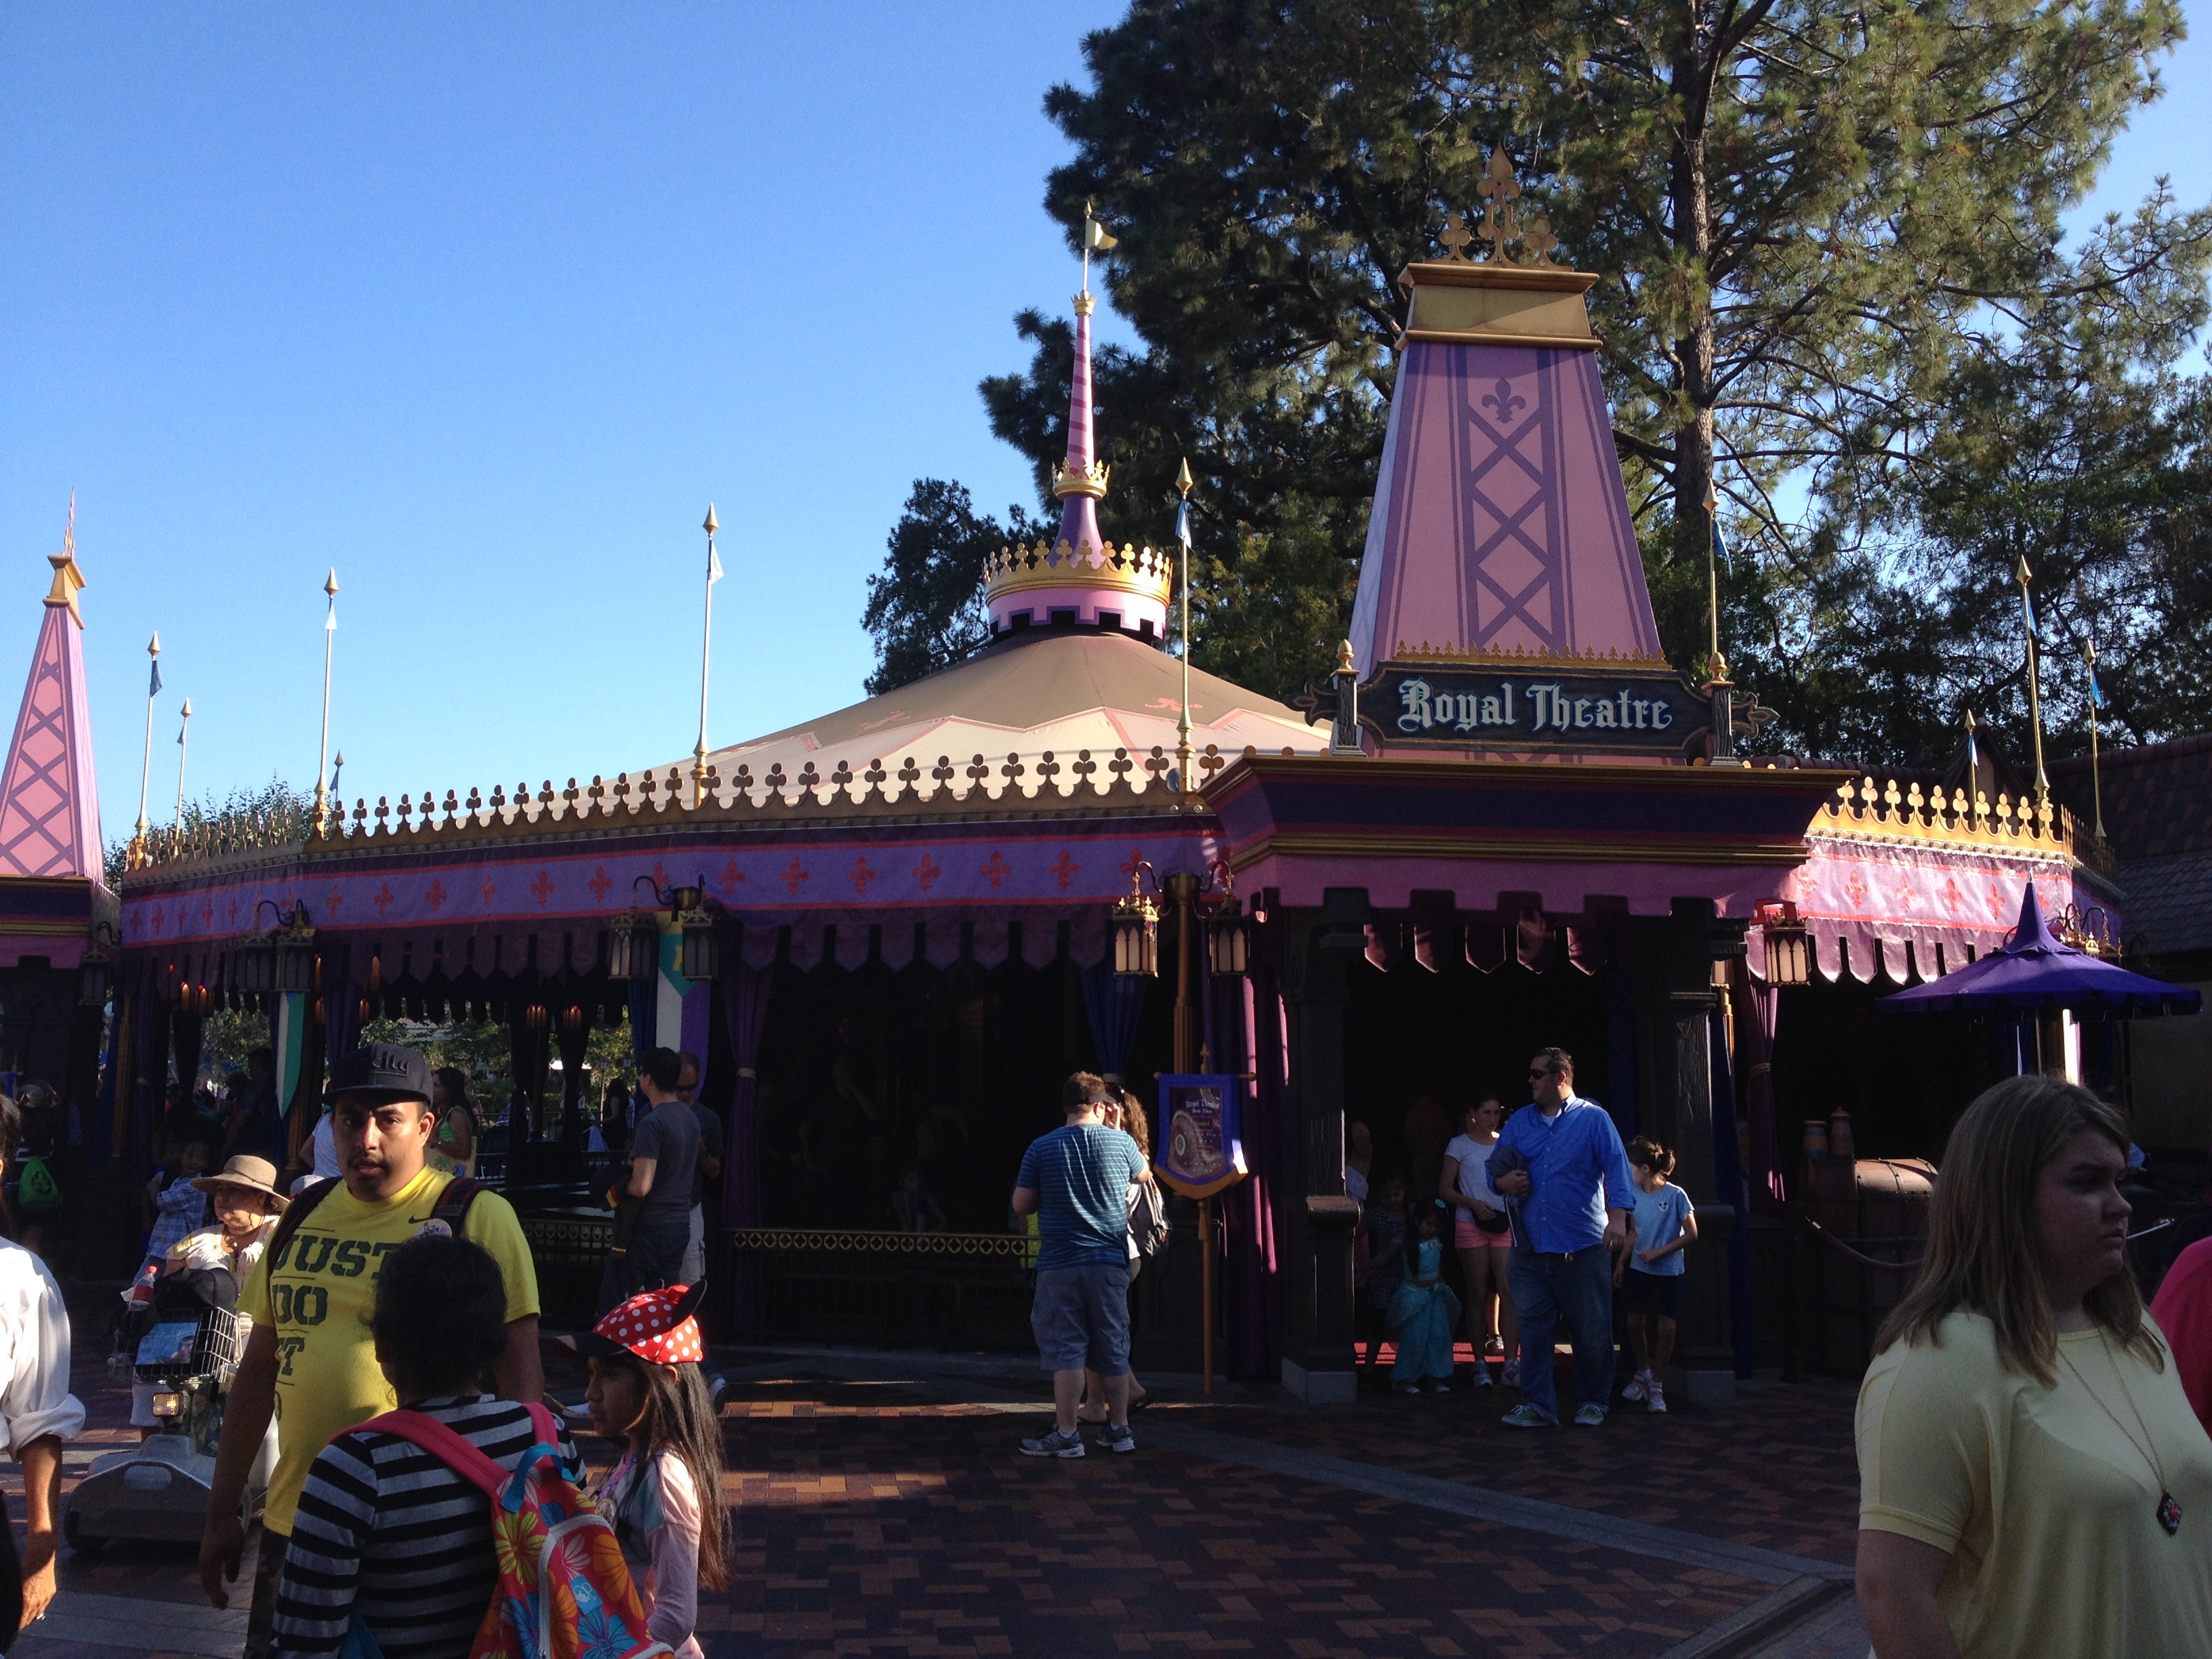 Top 10 Things Not to Miss at Disneyland